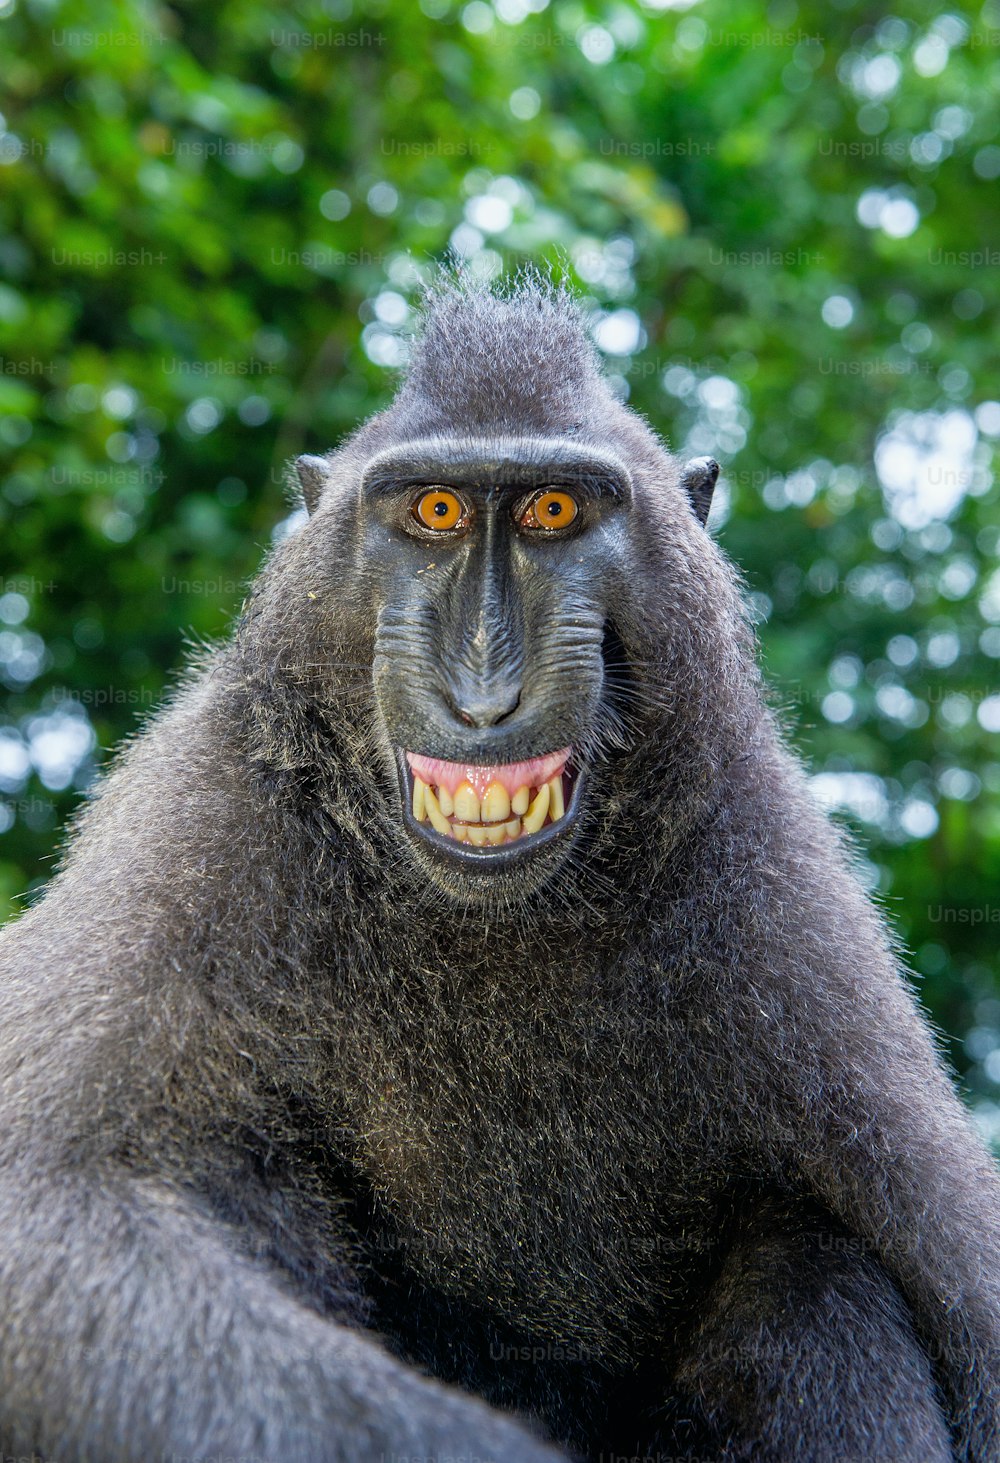 Celebes crested macaque with open mouth. Close up portrait on the green natural background. Crested black macaque, Sulawesi crested macaque, or black ape. Natural habitat. Sulawesi Island. Indonesia